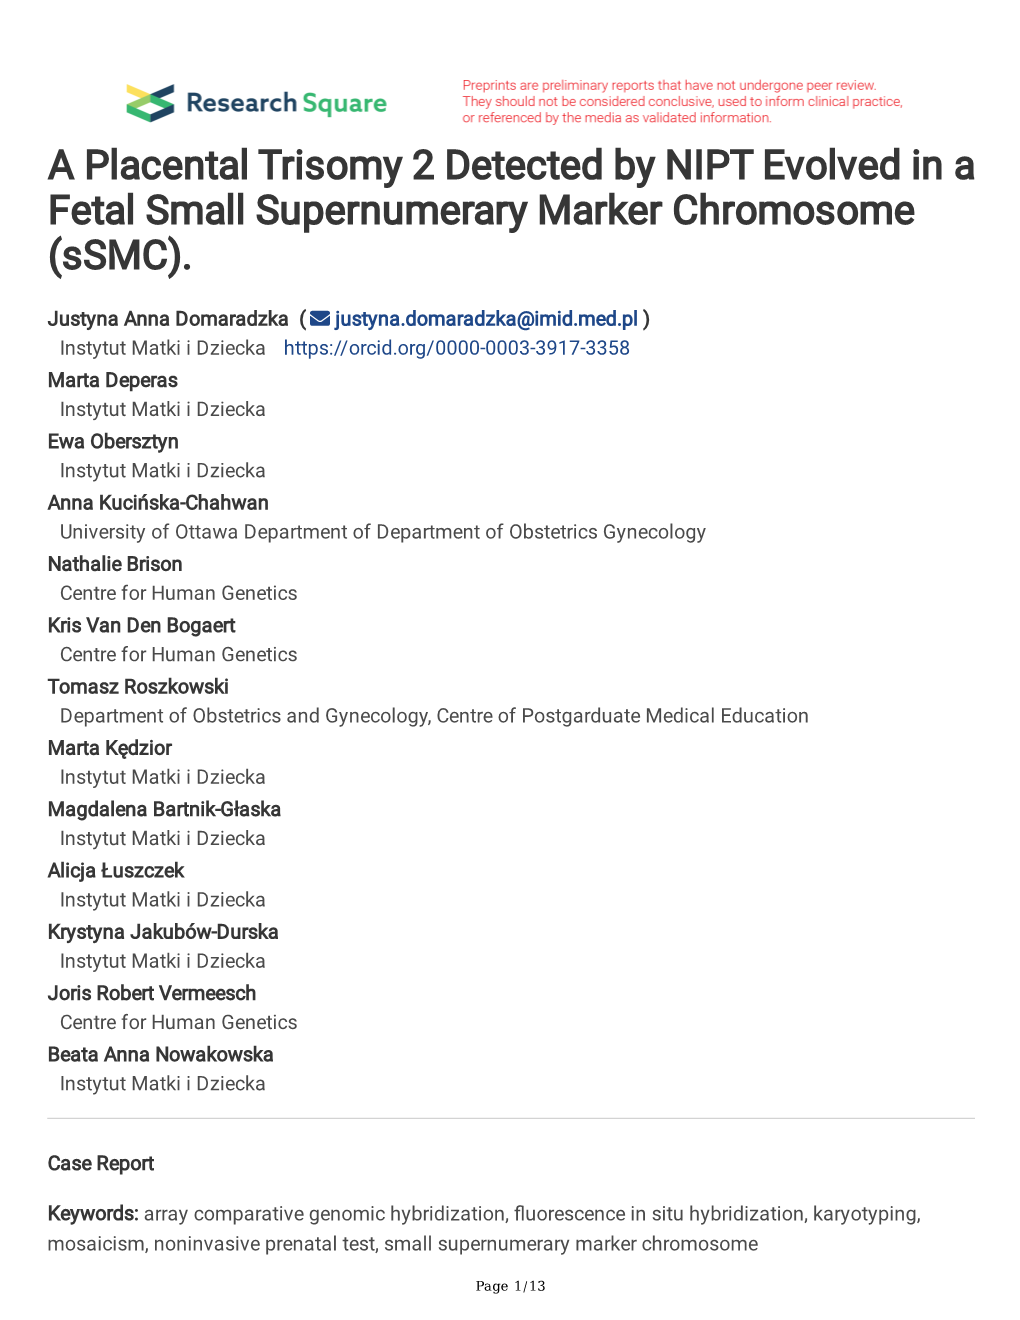 A Placental Trisomy 2 Detected by NIPT Evolved in a Fetal Small Supernumerary Marker Chromosome (Ssmc)